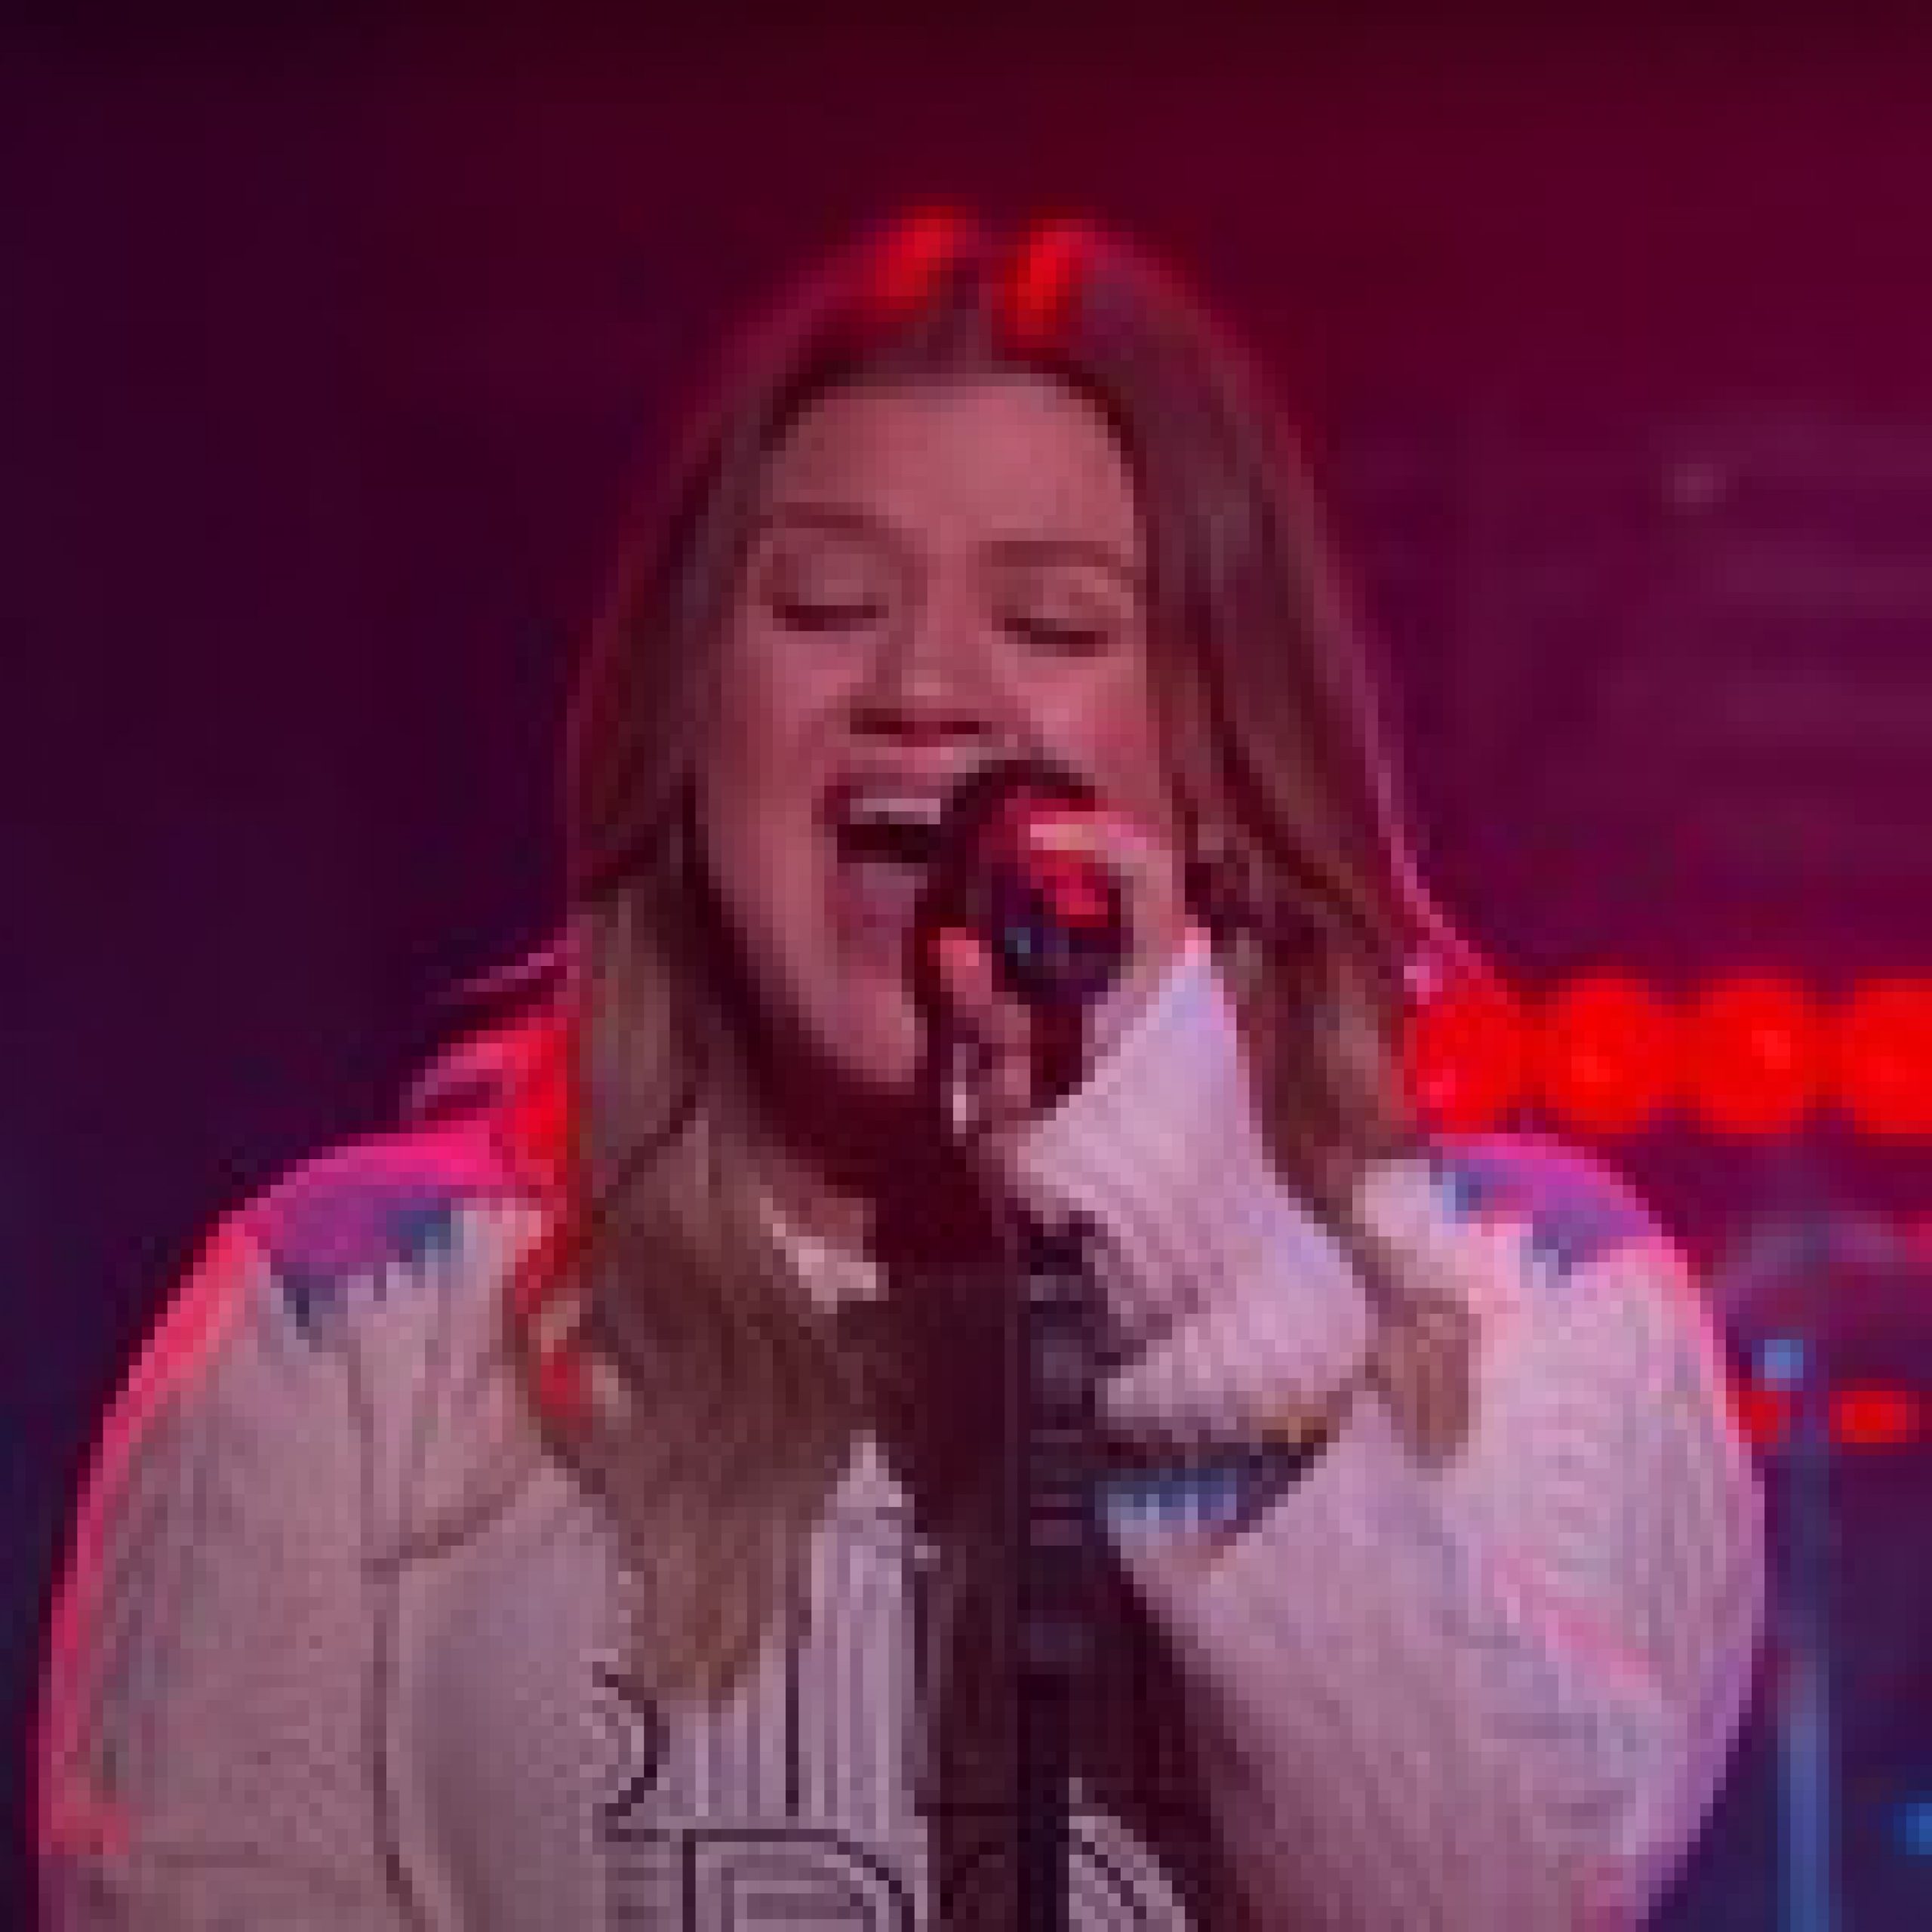 Kelly Clarkson Takes Us Home With a Cover of Semisonic’s ‘Closing Time’